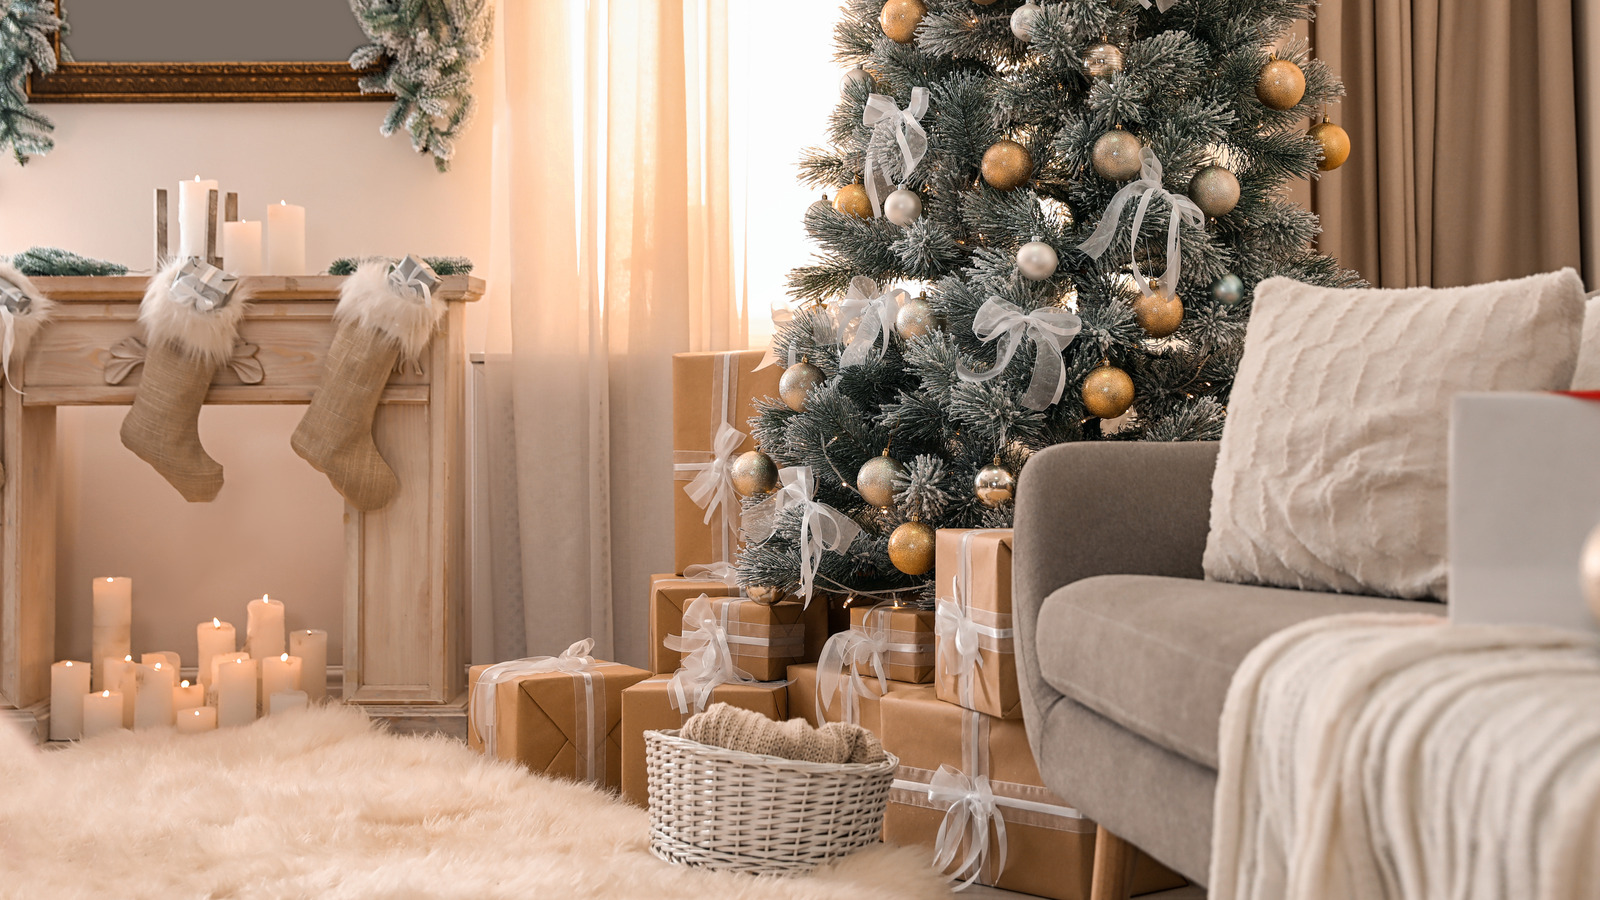 How To Achieve A Cozy Look For Holiday Decor